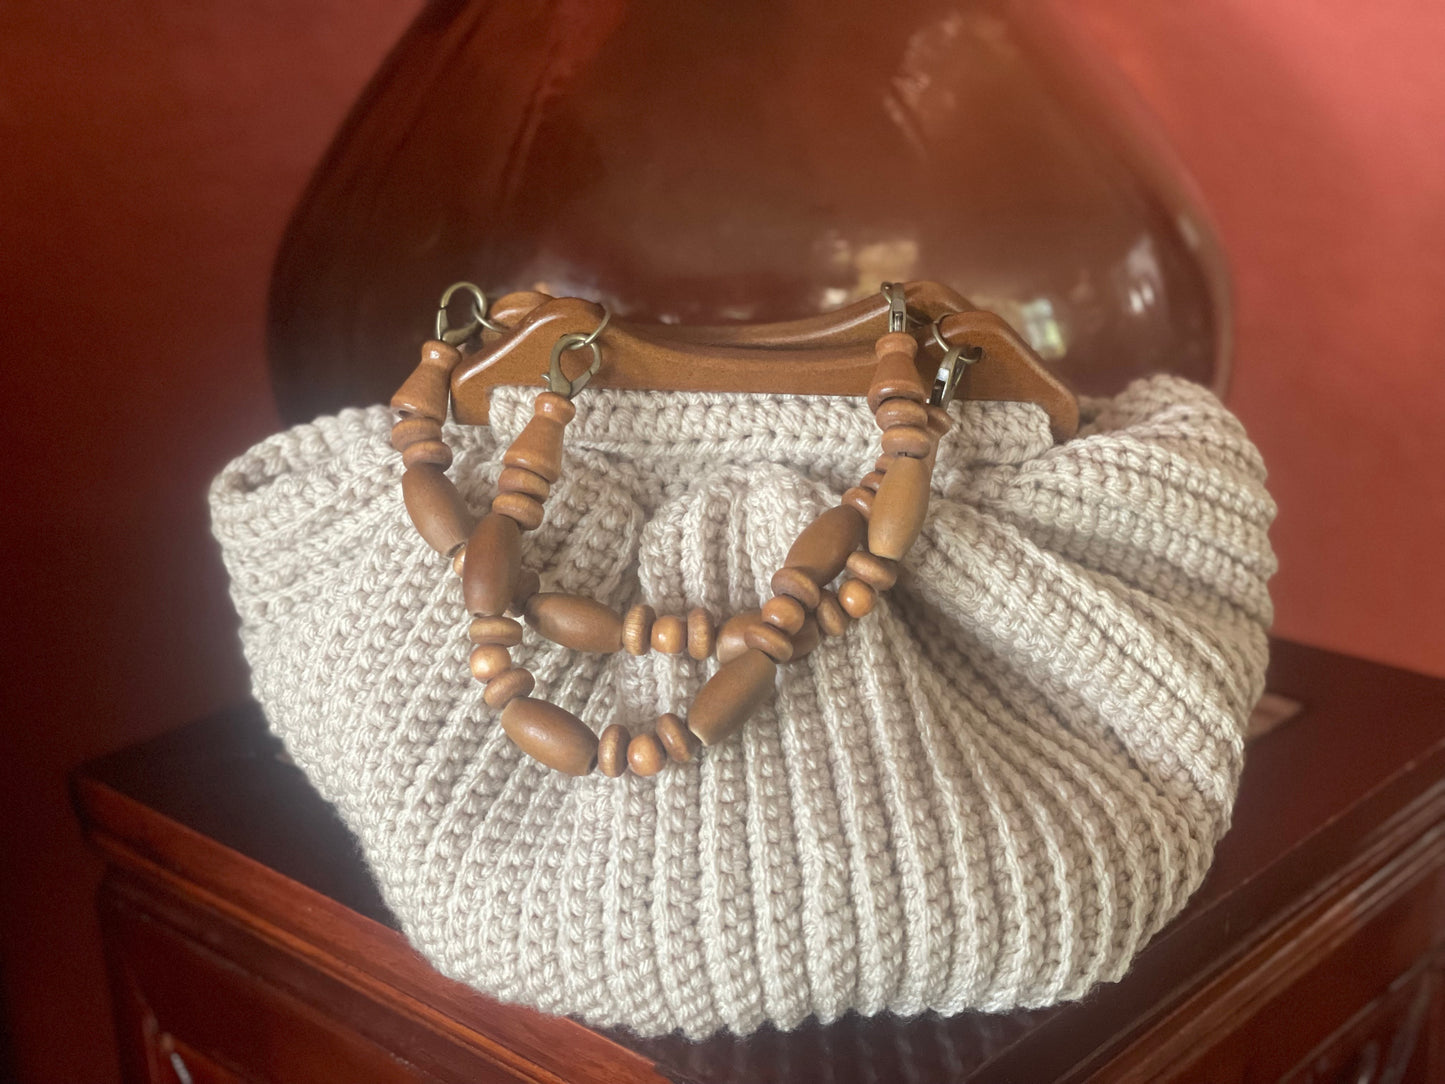 Malibu lifestyle best describes this Boho chic, hand crocheted bag. One-of-a-kind, reflecting Malibu's beautiful sandy beaches with up cycled, cotton blend yarn and wood beaded handles that are removable to create a clutch style. Bag Dimensions: 12"wide x 9"high (Handles: 5"wide x 5"high) Color: Sand Consciously crafted in California